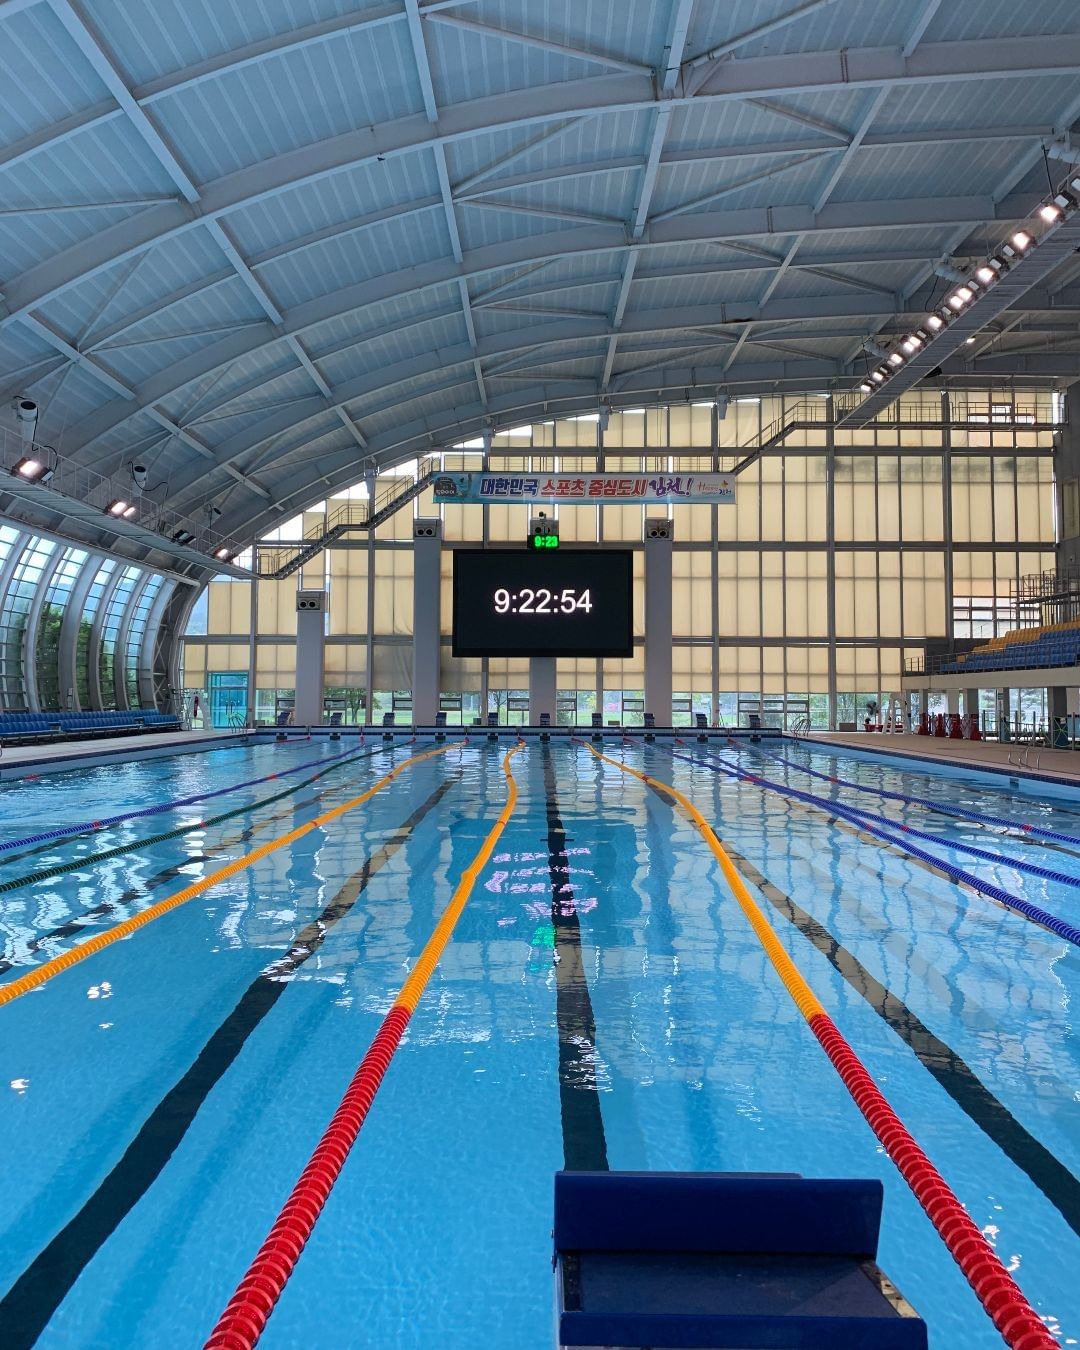 Speedo UK - Pool perfection 🤩 (excusing the lane ropes 🤪) This is the swimming pool in South Korea where one of our Team Speedo photoshoots took place! 📷 
Who would love to be part of a Speedo photosh...